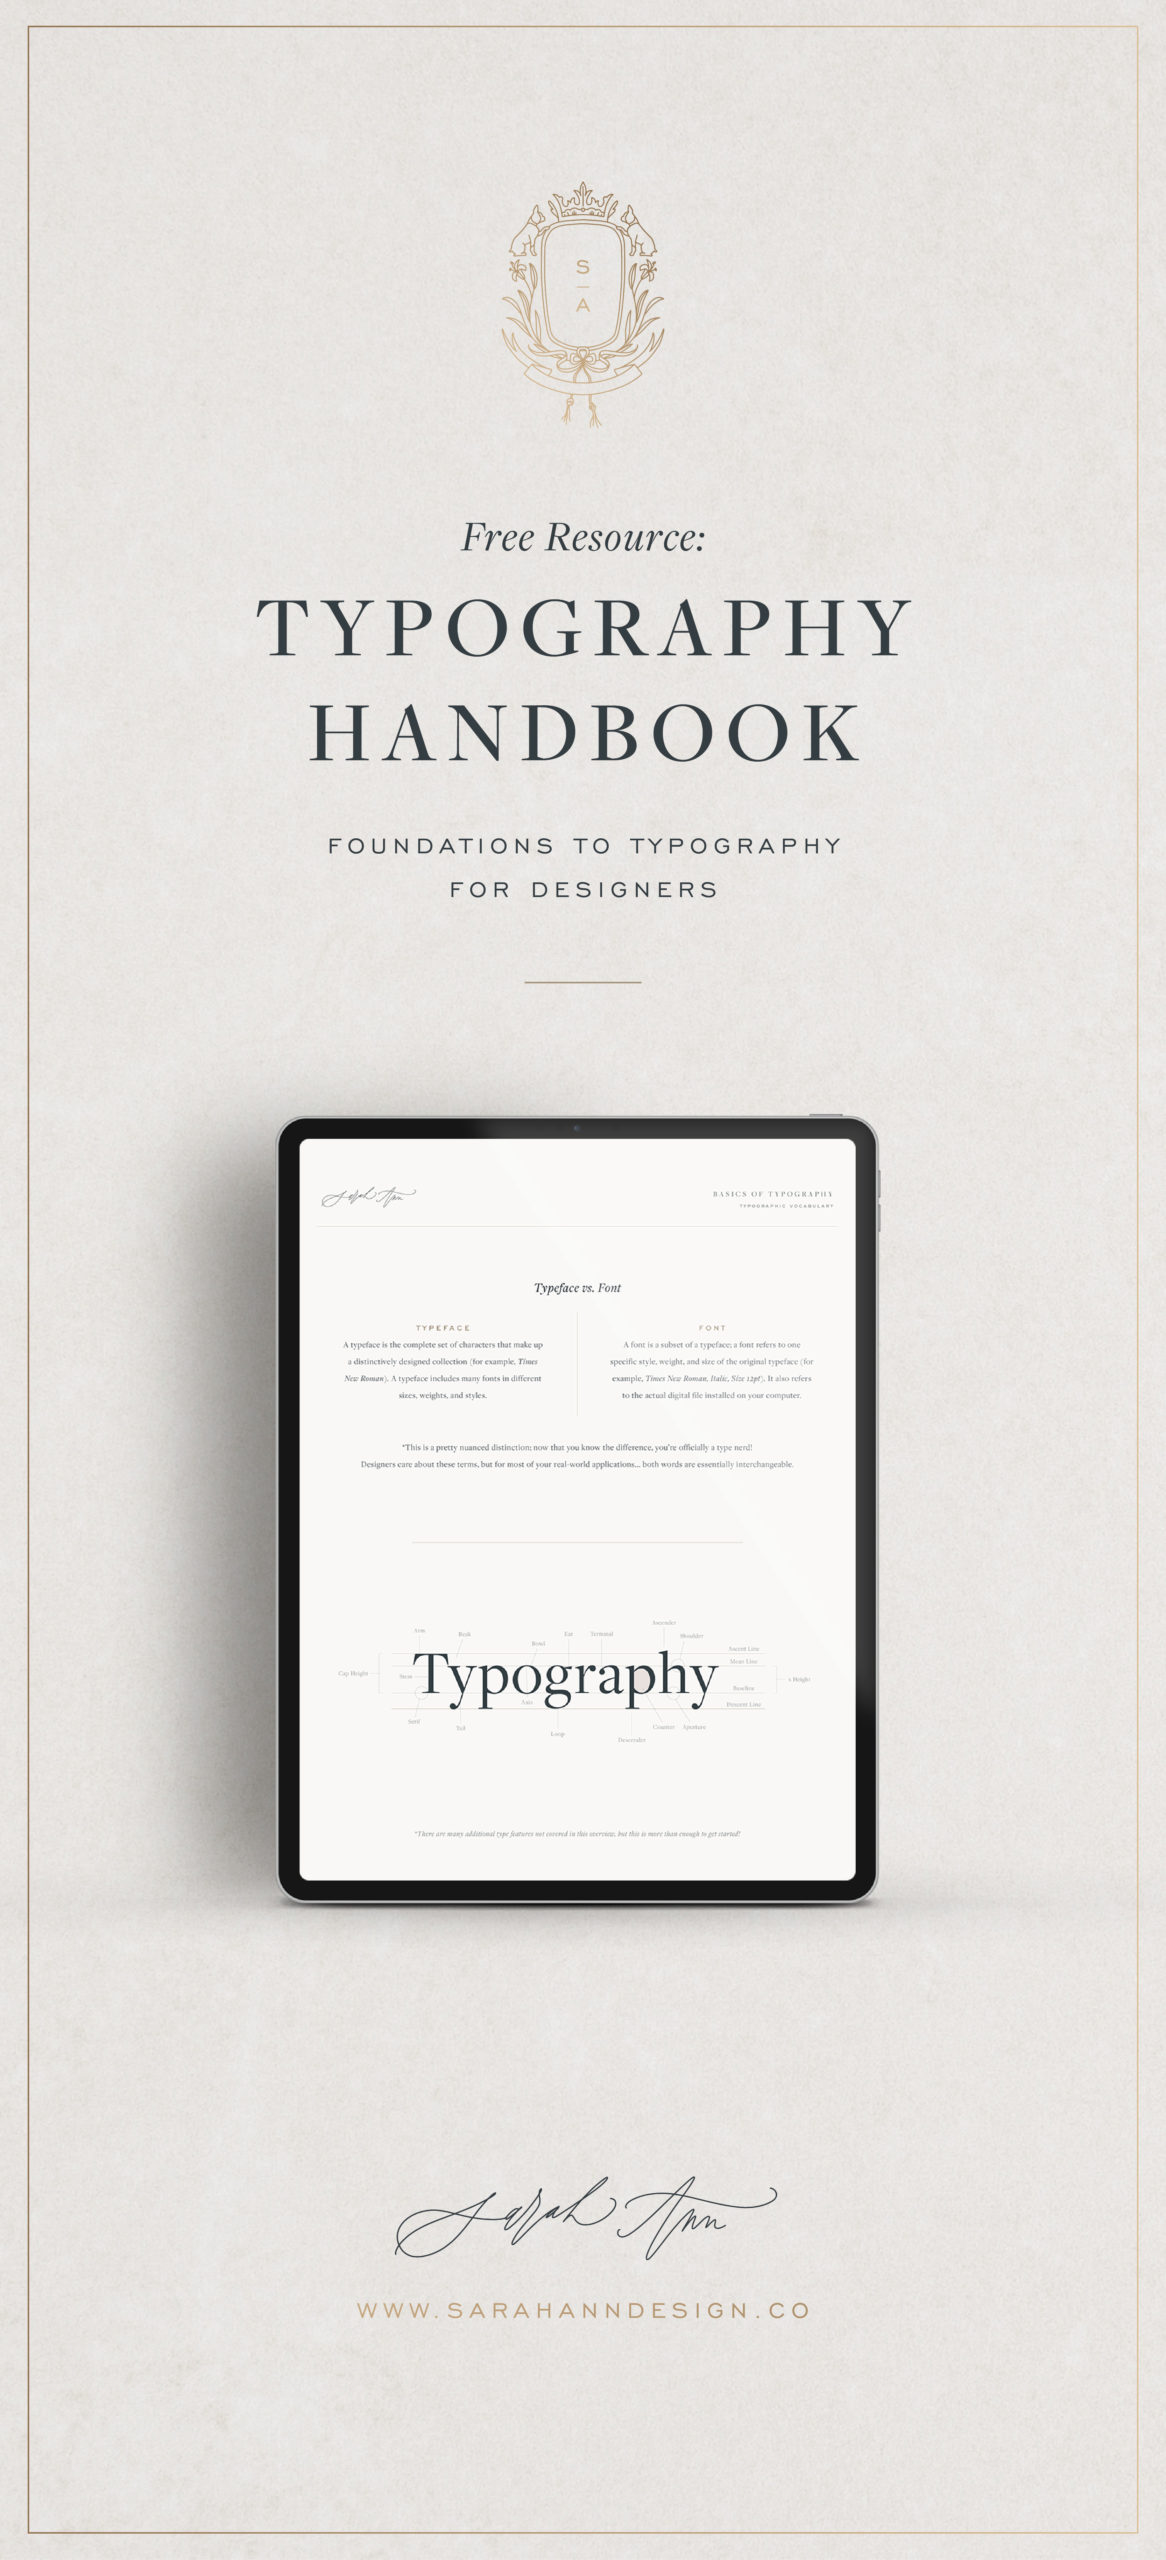 Learn Typography - Sarah Ann Design - Free Download - Foundations of Typography Handbook for Graphic Designers